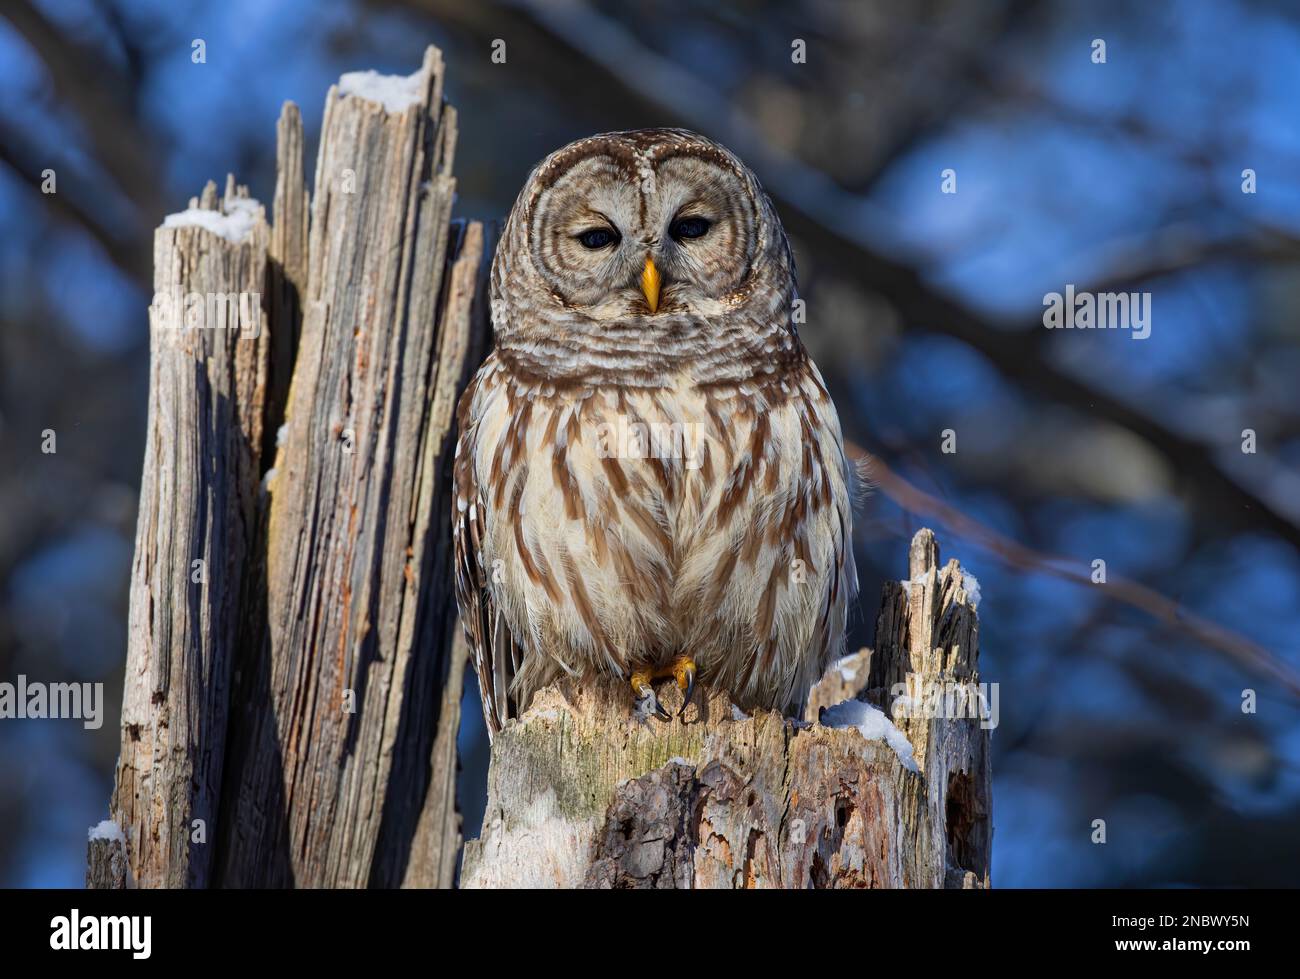 Barred owl (Strix varia) perched on an old tree stump in winter in Canada Stock Photo